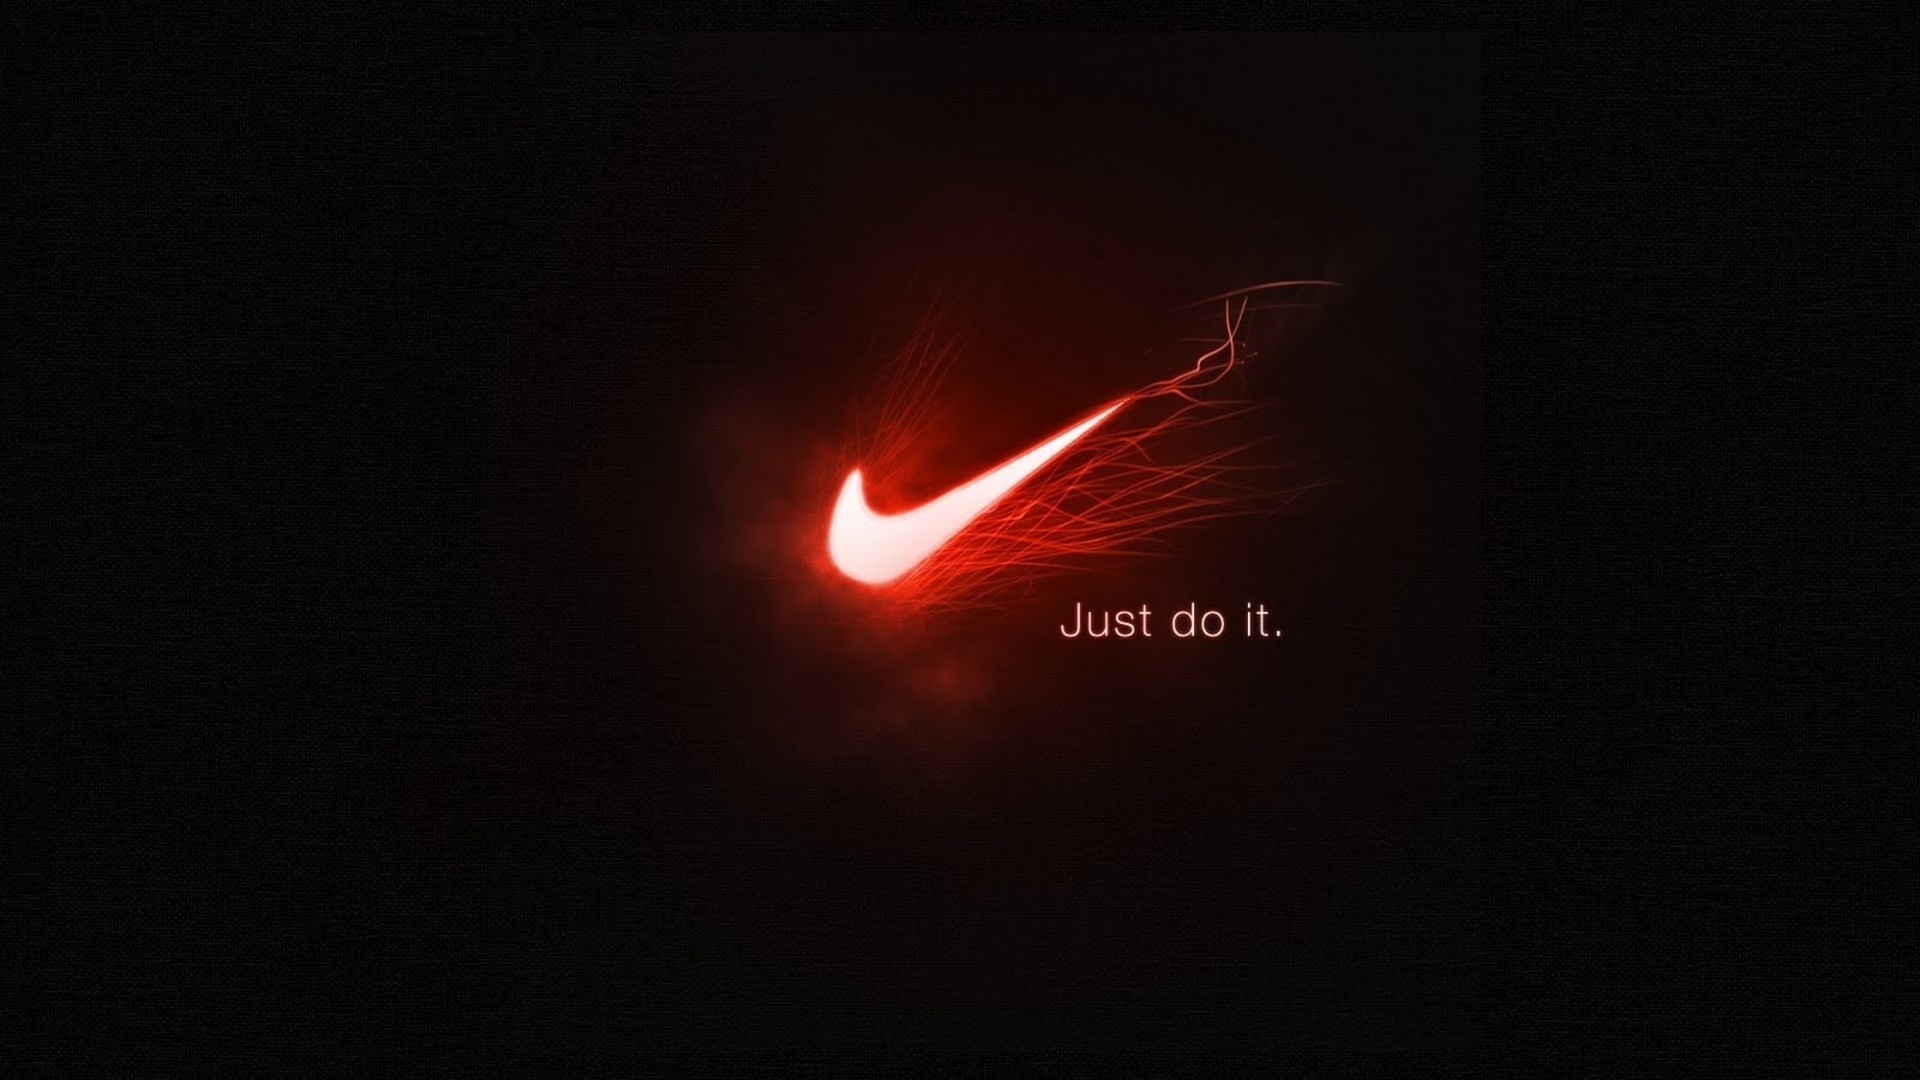 1920x1080  Nike Just Do It Wallpaper For Iphone #XKm